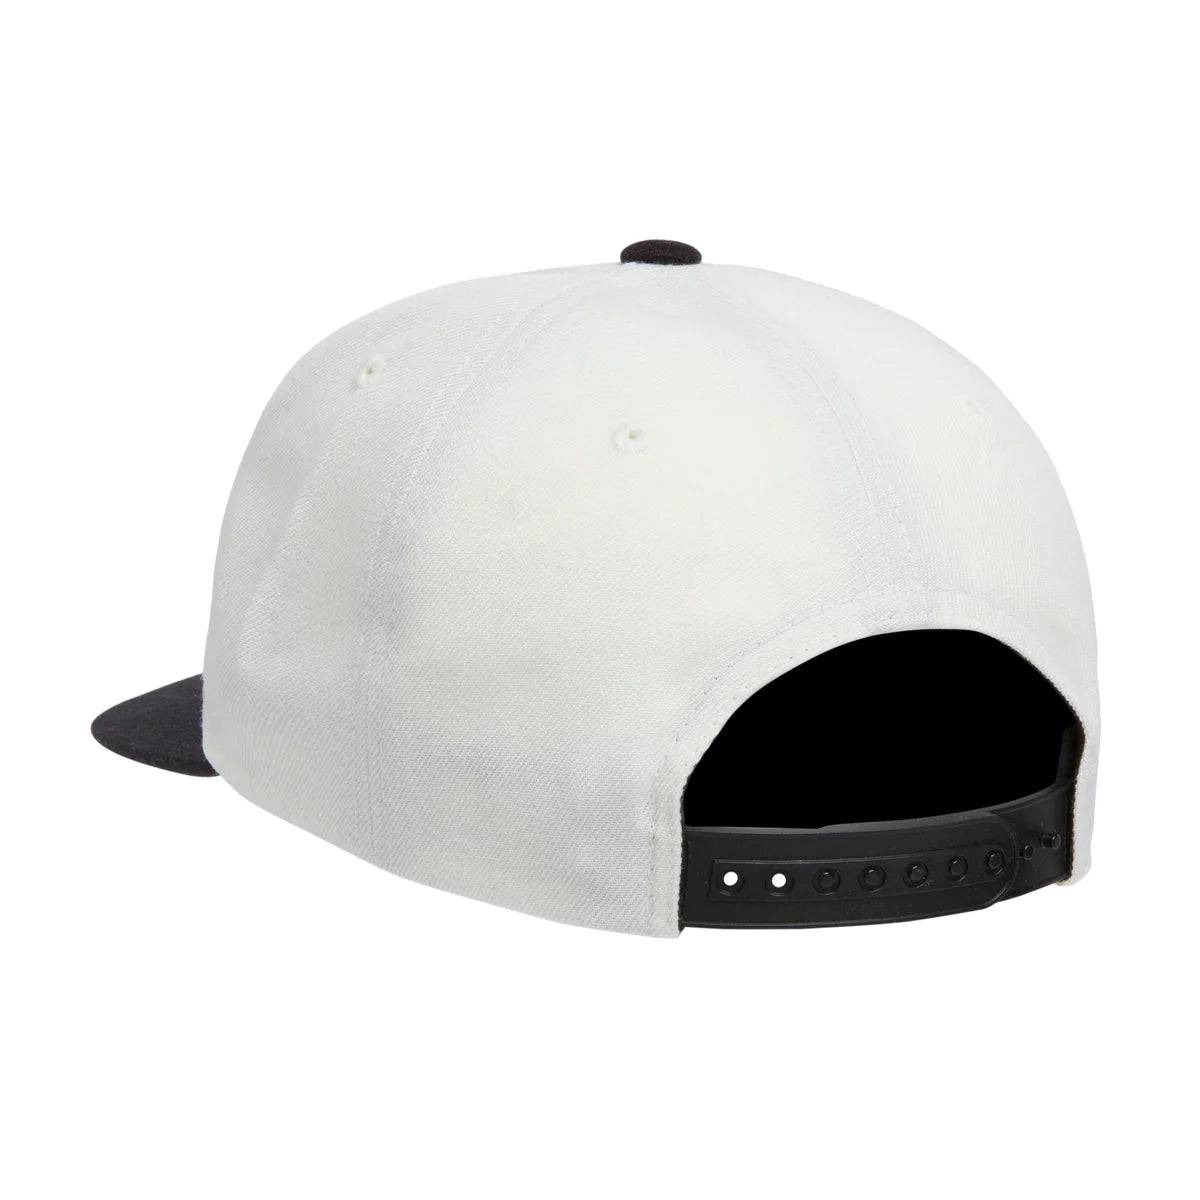 HUF HUF Torch MMXXII Snapback Cap | White Caps | The Vines